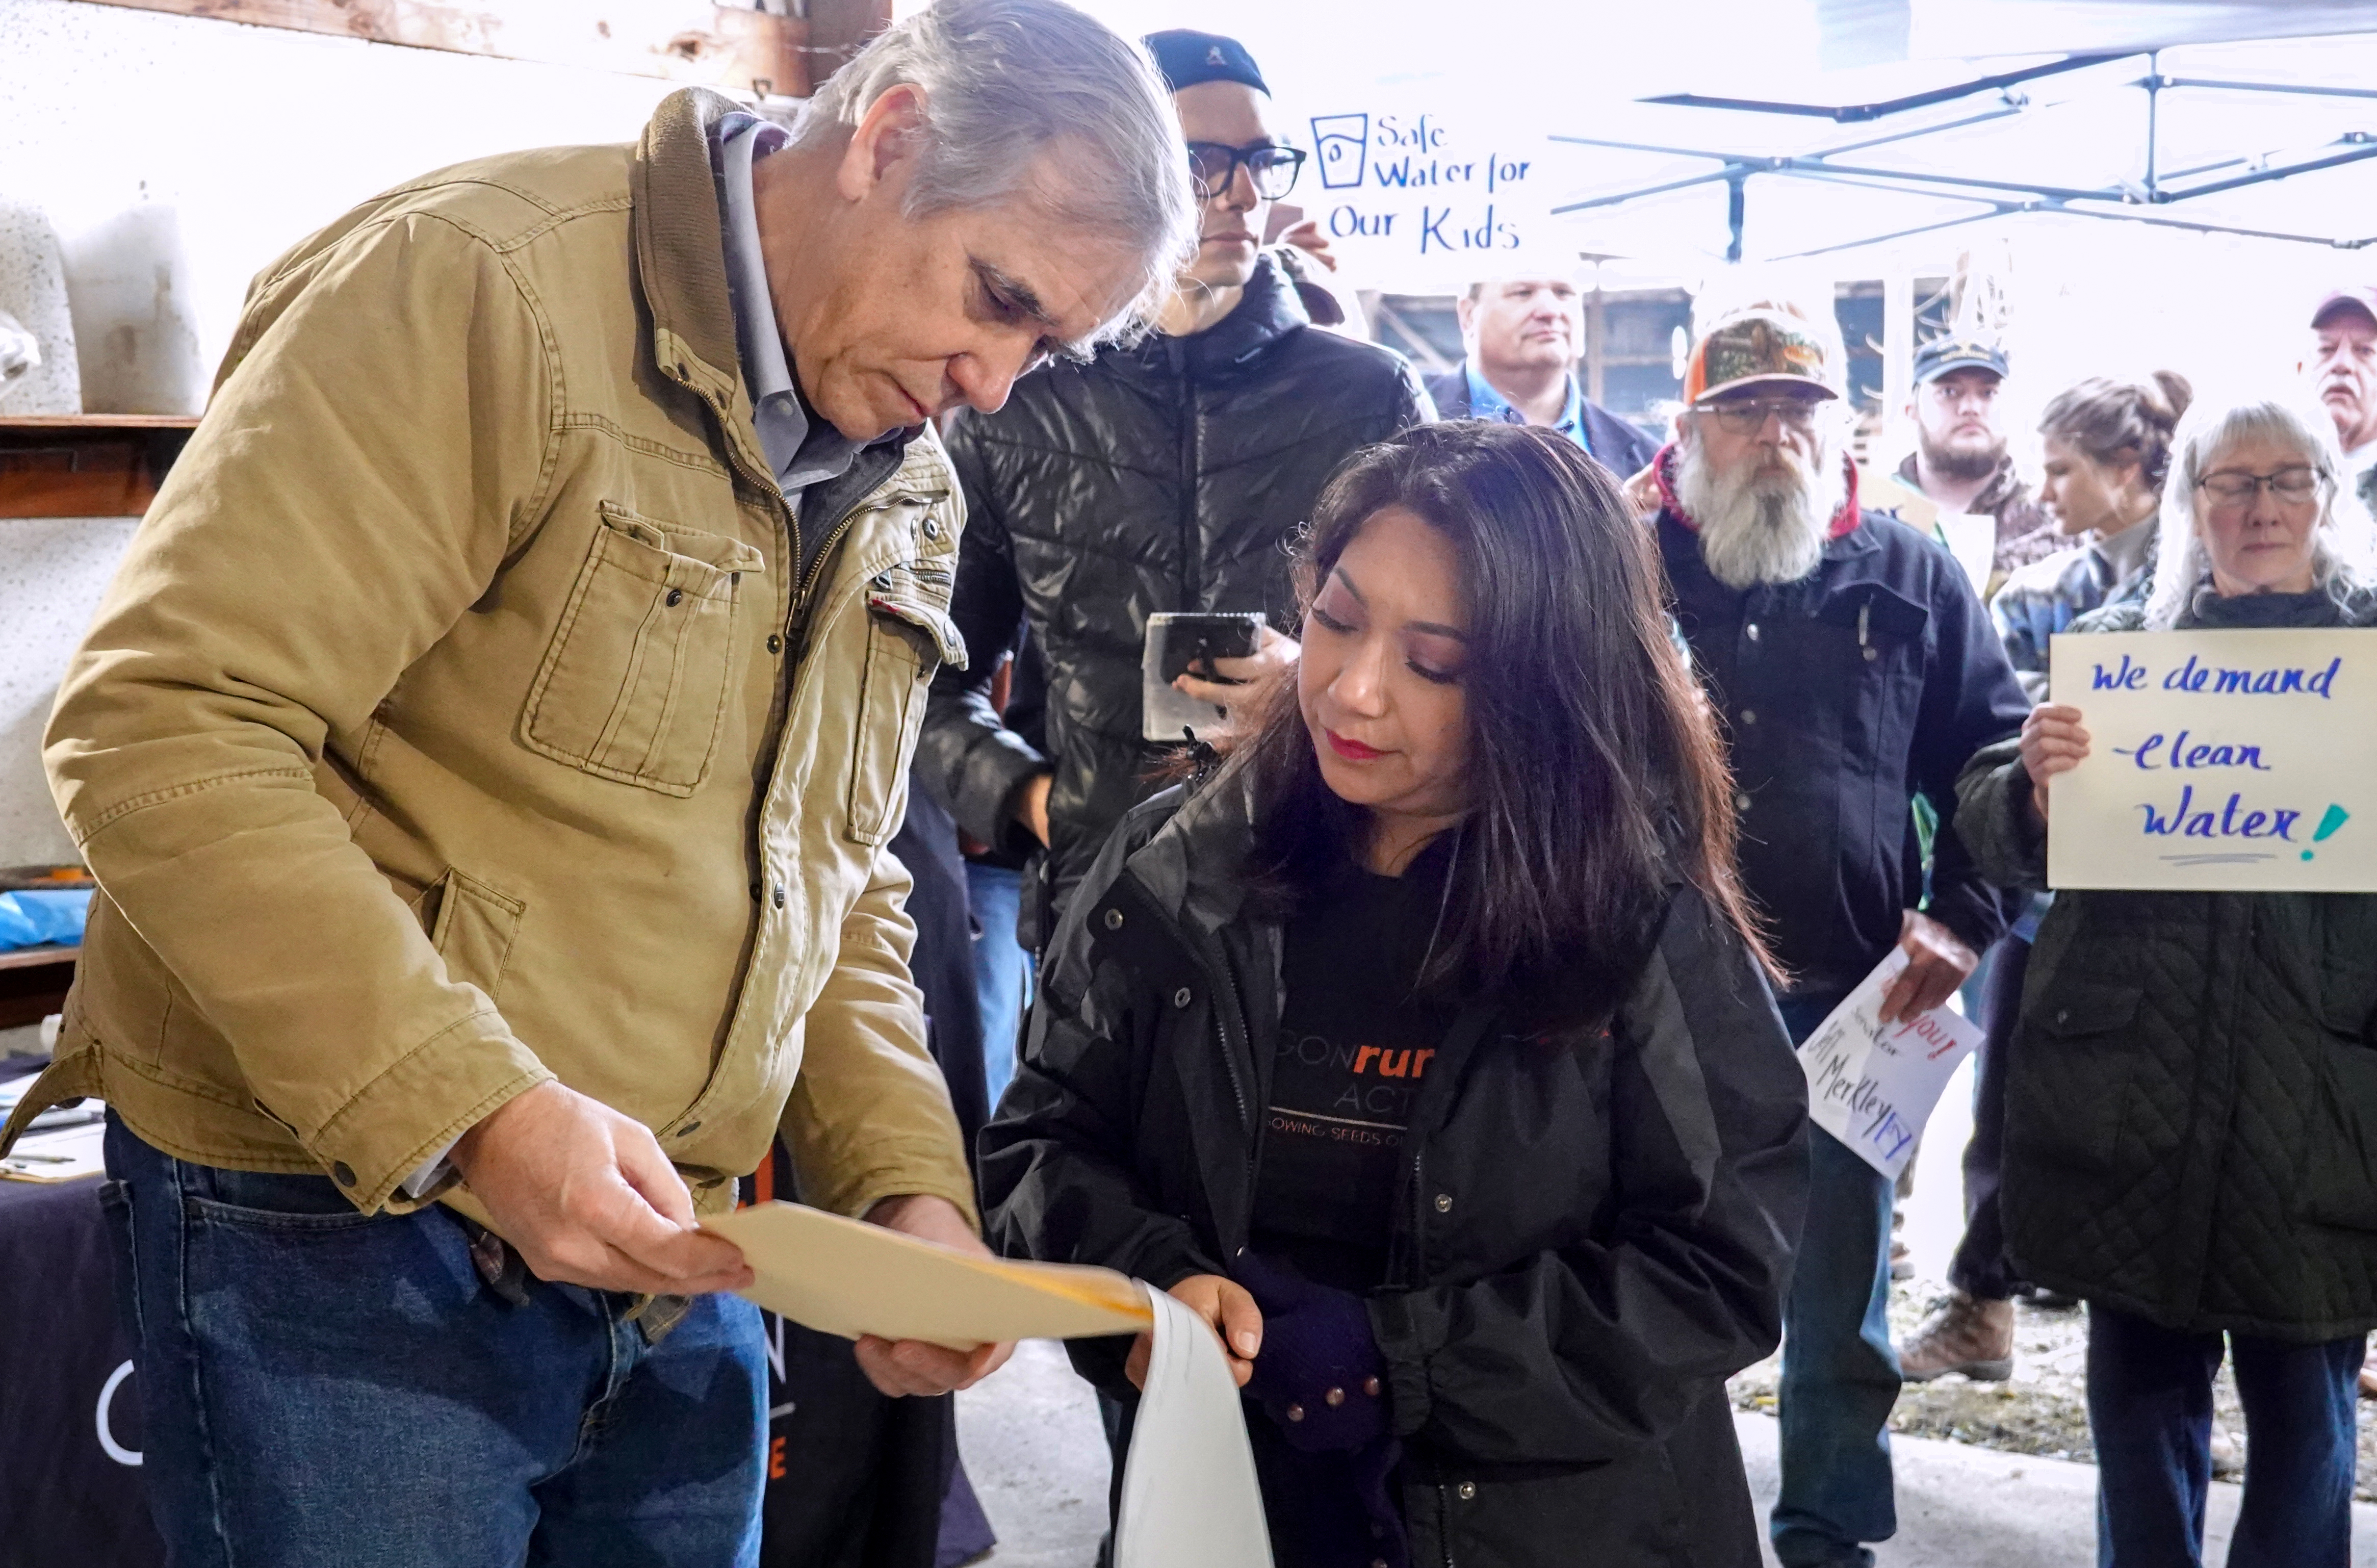 Jeff Merkley looks down at some pieces of paper while a woman stands next to him in front of a small crowd of people.